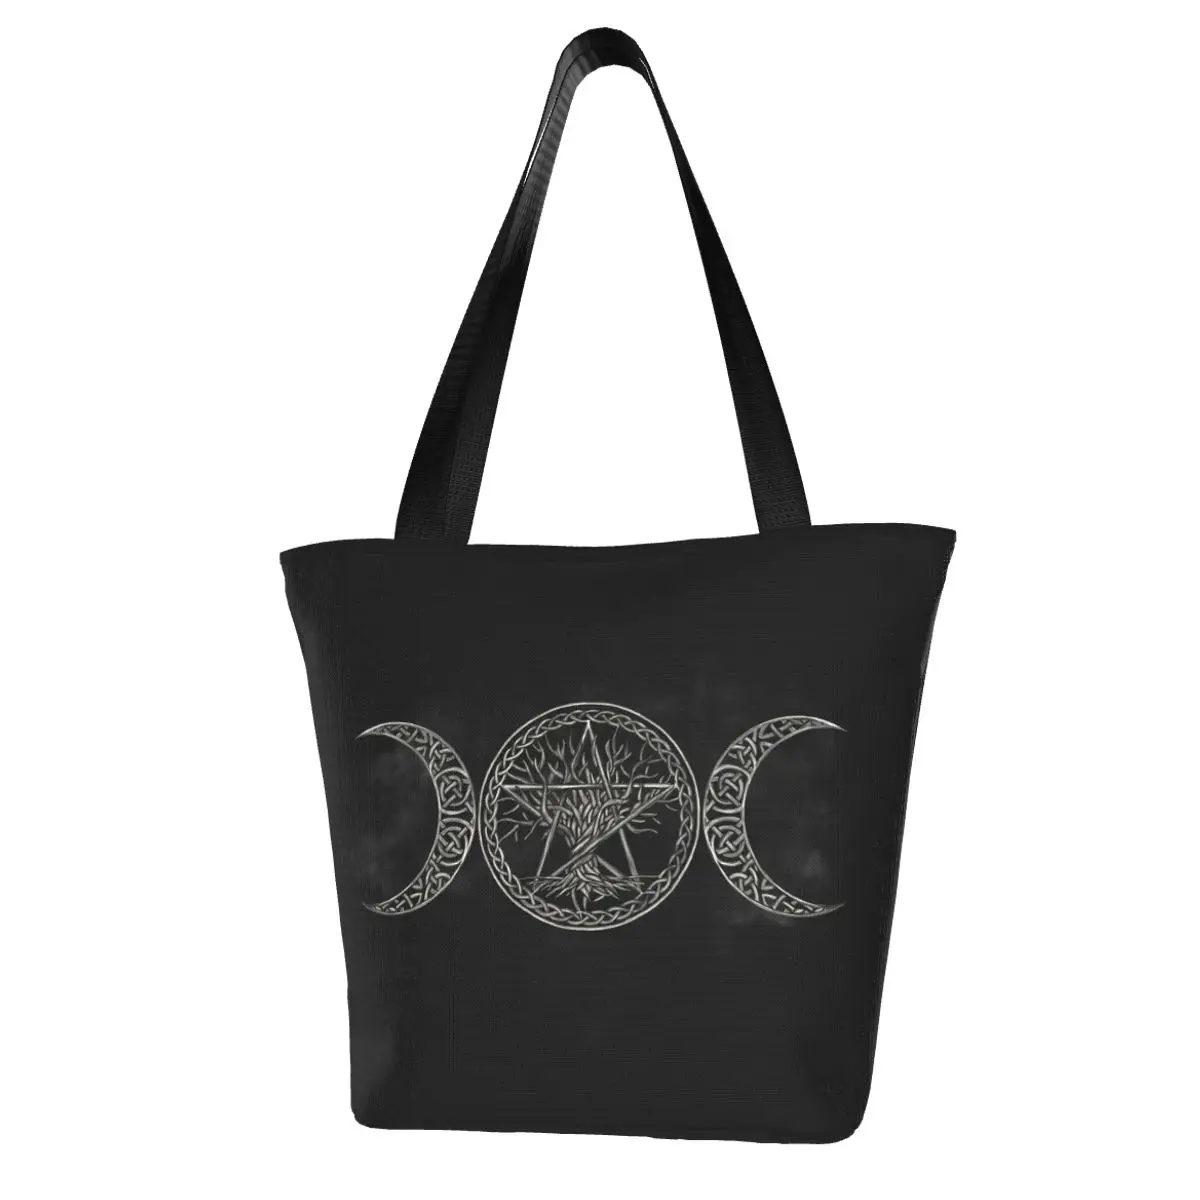 Triple Moon With Pentagram And Tree Of Life Shopping Bag Aesthetic Cloth Outdoor Handbag Female Fashion Bags